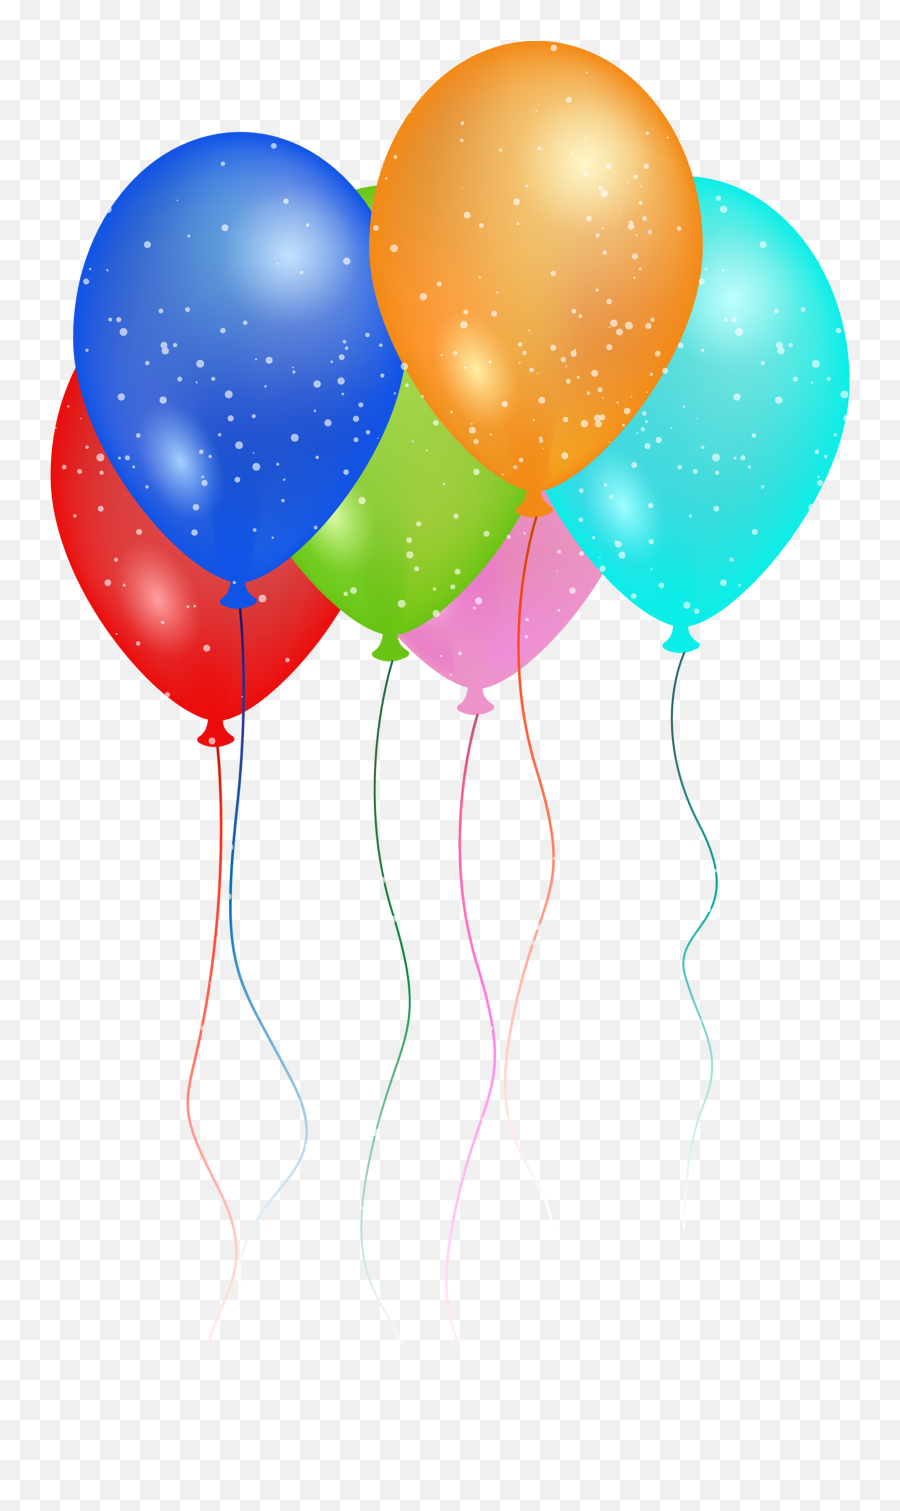 Birthday Party Balloon Png Image 43927 - Free Icons And Png Happy Birthday Party Balloons,Balloons Png Transparent Background